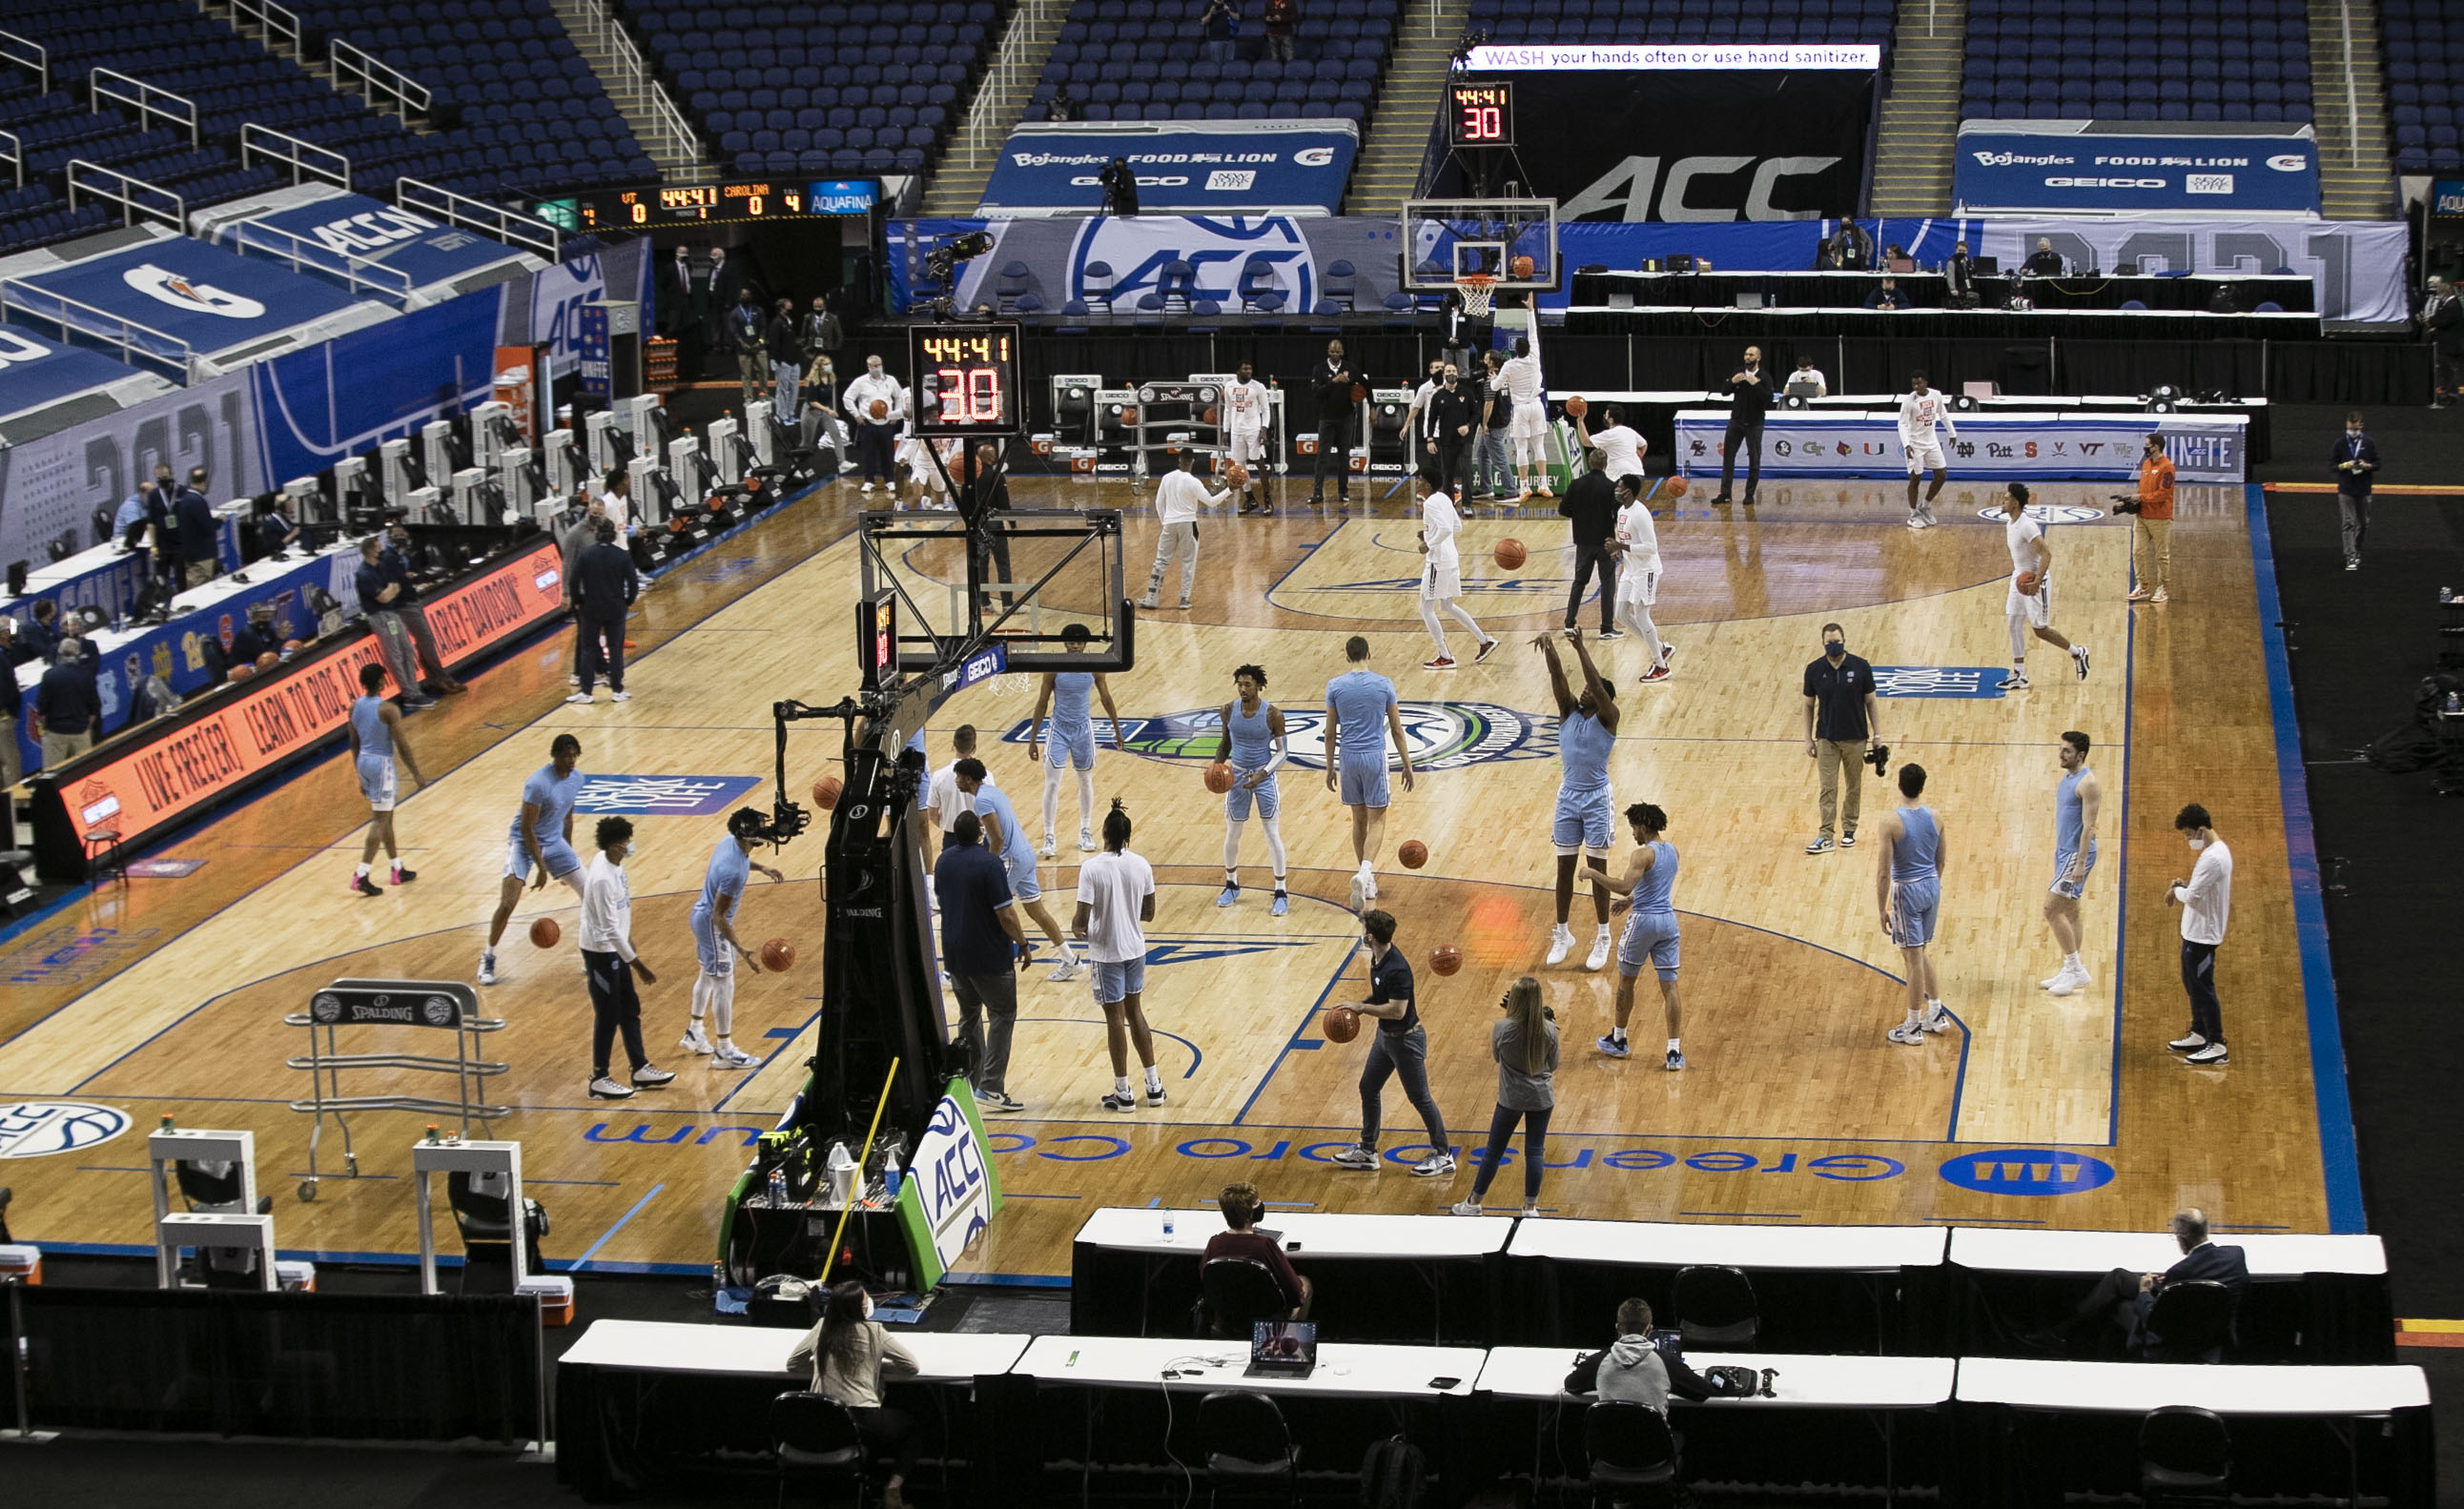 UNC Basketball in the ACC Tournament How To Watch, Cord-Cutting Options and Tip-Off Time